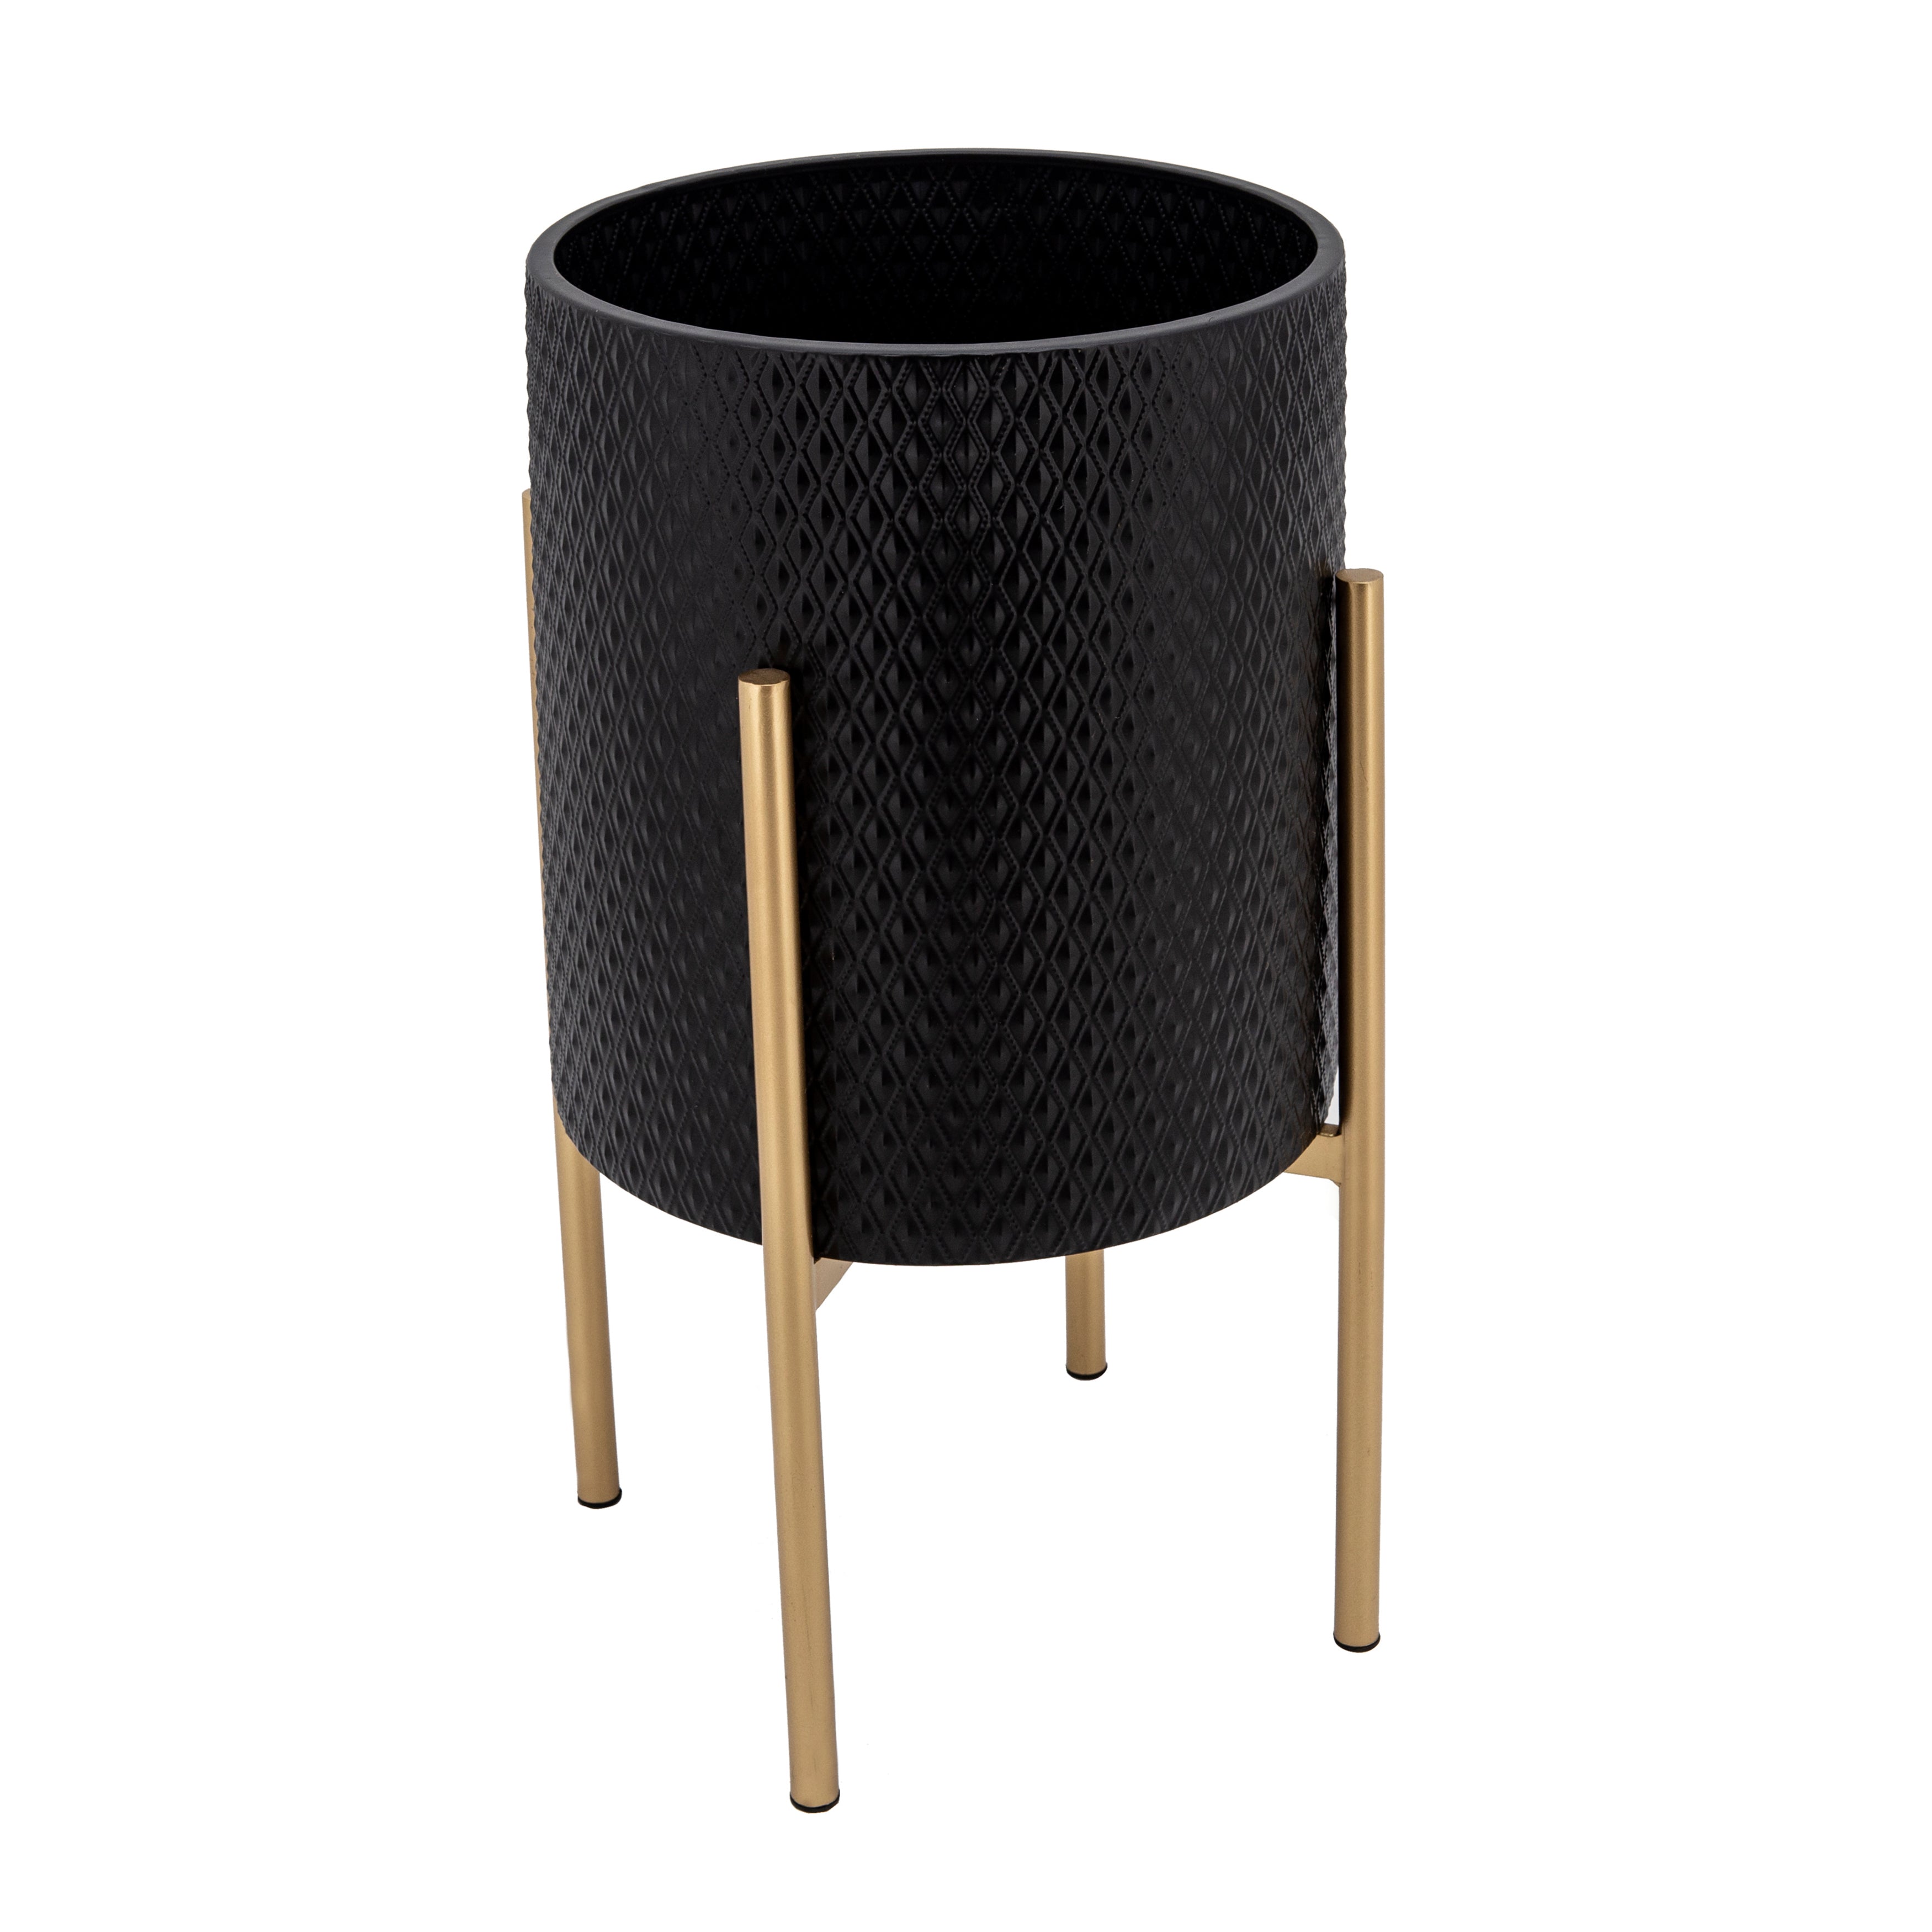 Set of 2 Textured Planter On Stand, Black/Gold, Planters